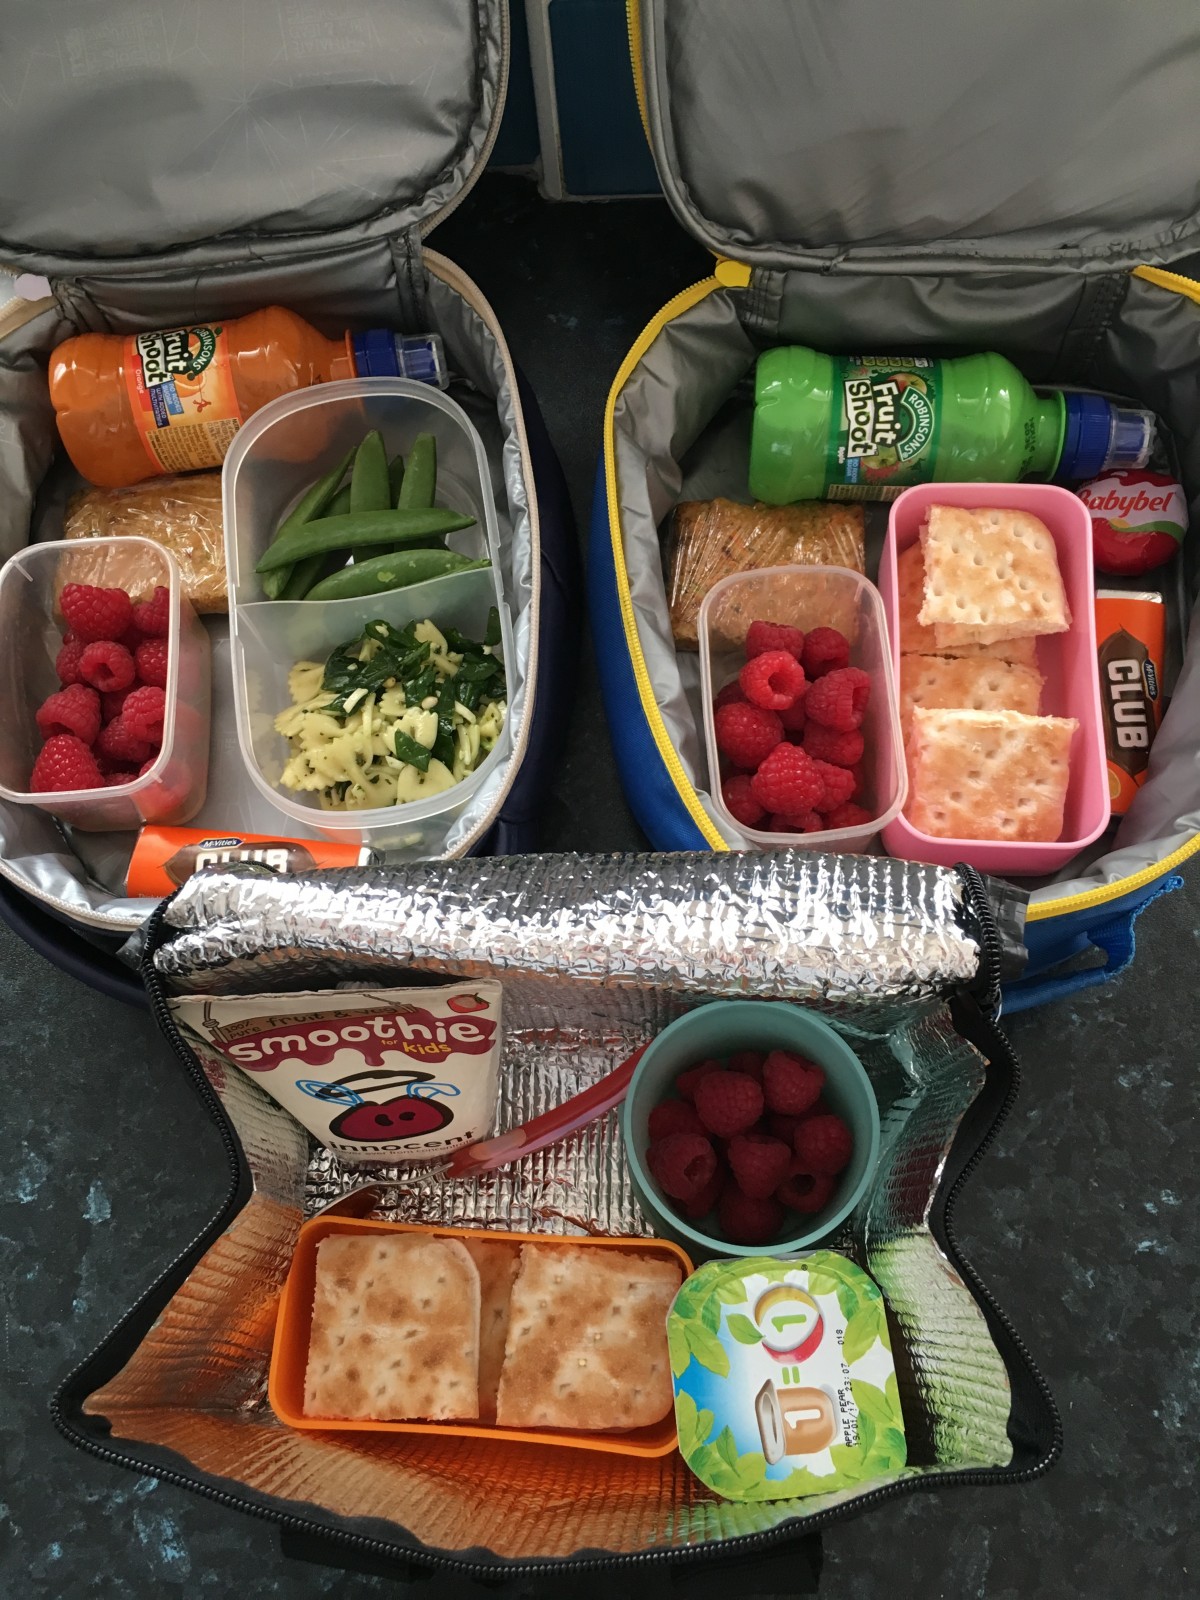 Harrogte Mama, Harrogate Mums, PAcked lunch boxes for kids